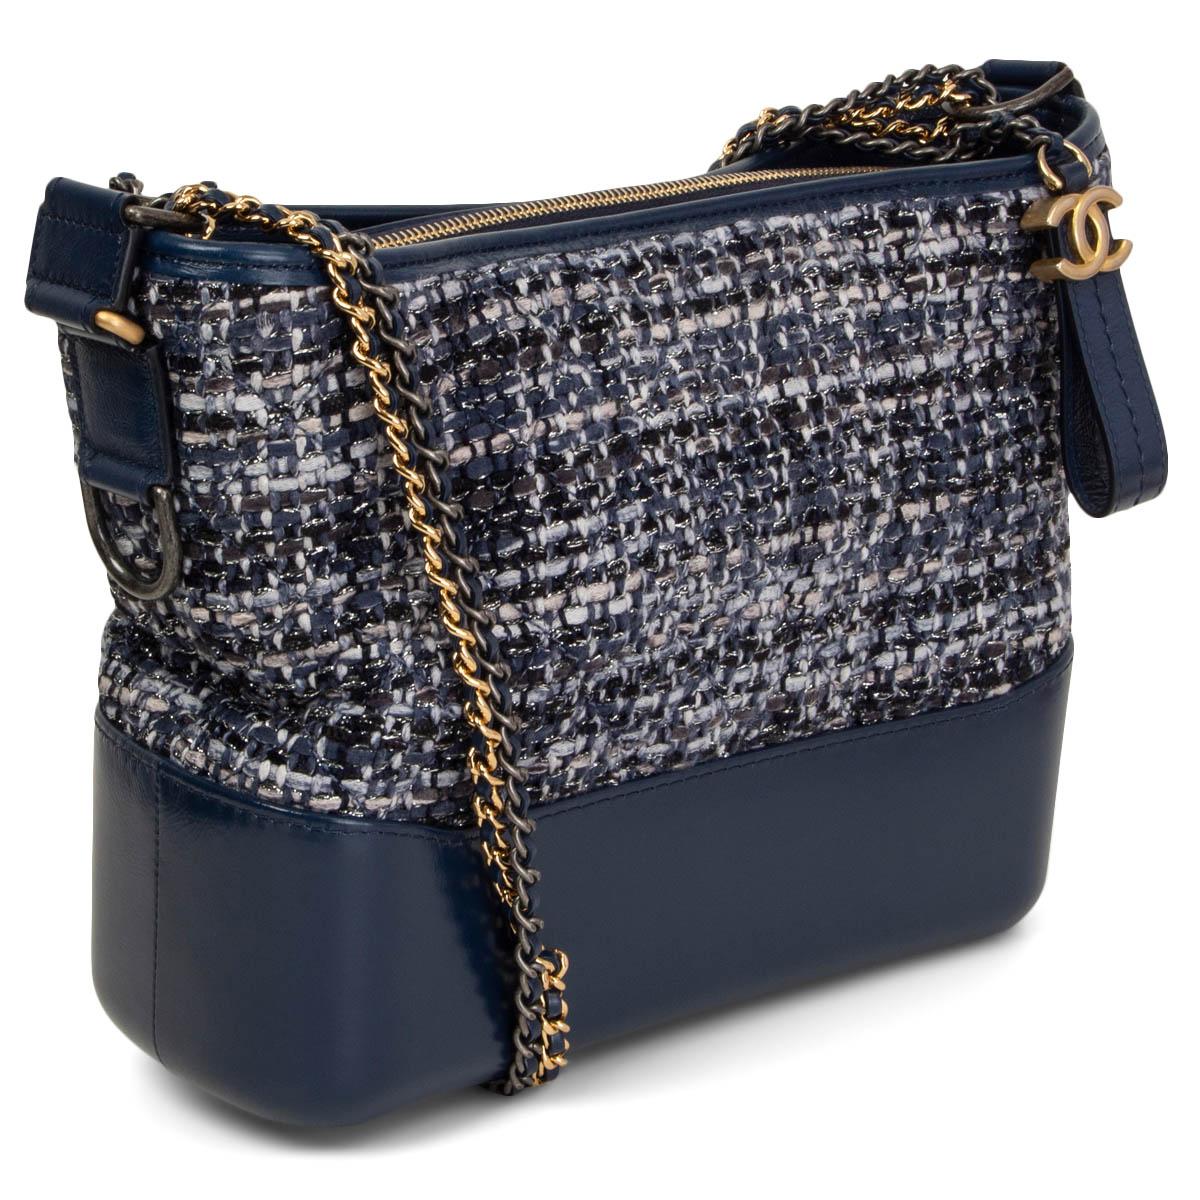 100% authentic Chanel Gabrielle Hobo bag in navy blue, light grey, grey, light blue and midnight blue bouclé tweed and navy calfskin. Double chain shoulder-strap in gold-tone, silver-tone & ruthenium-finish metal. Opens with a CC zipper on top and